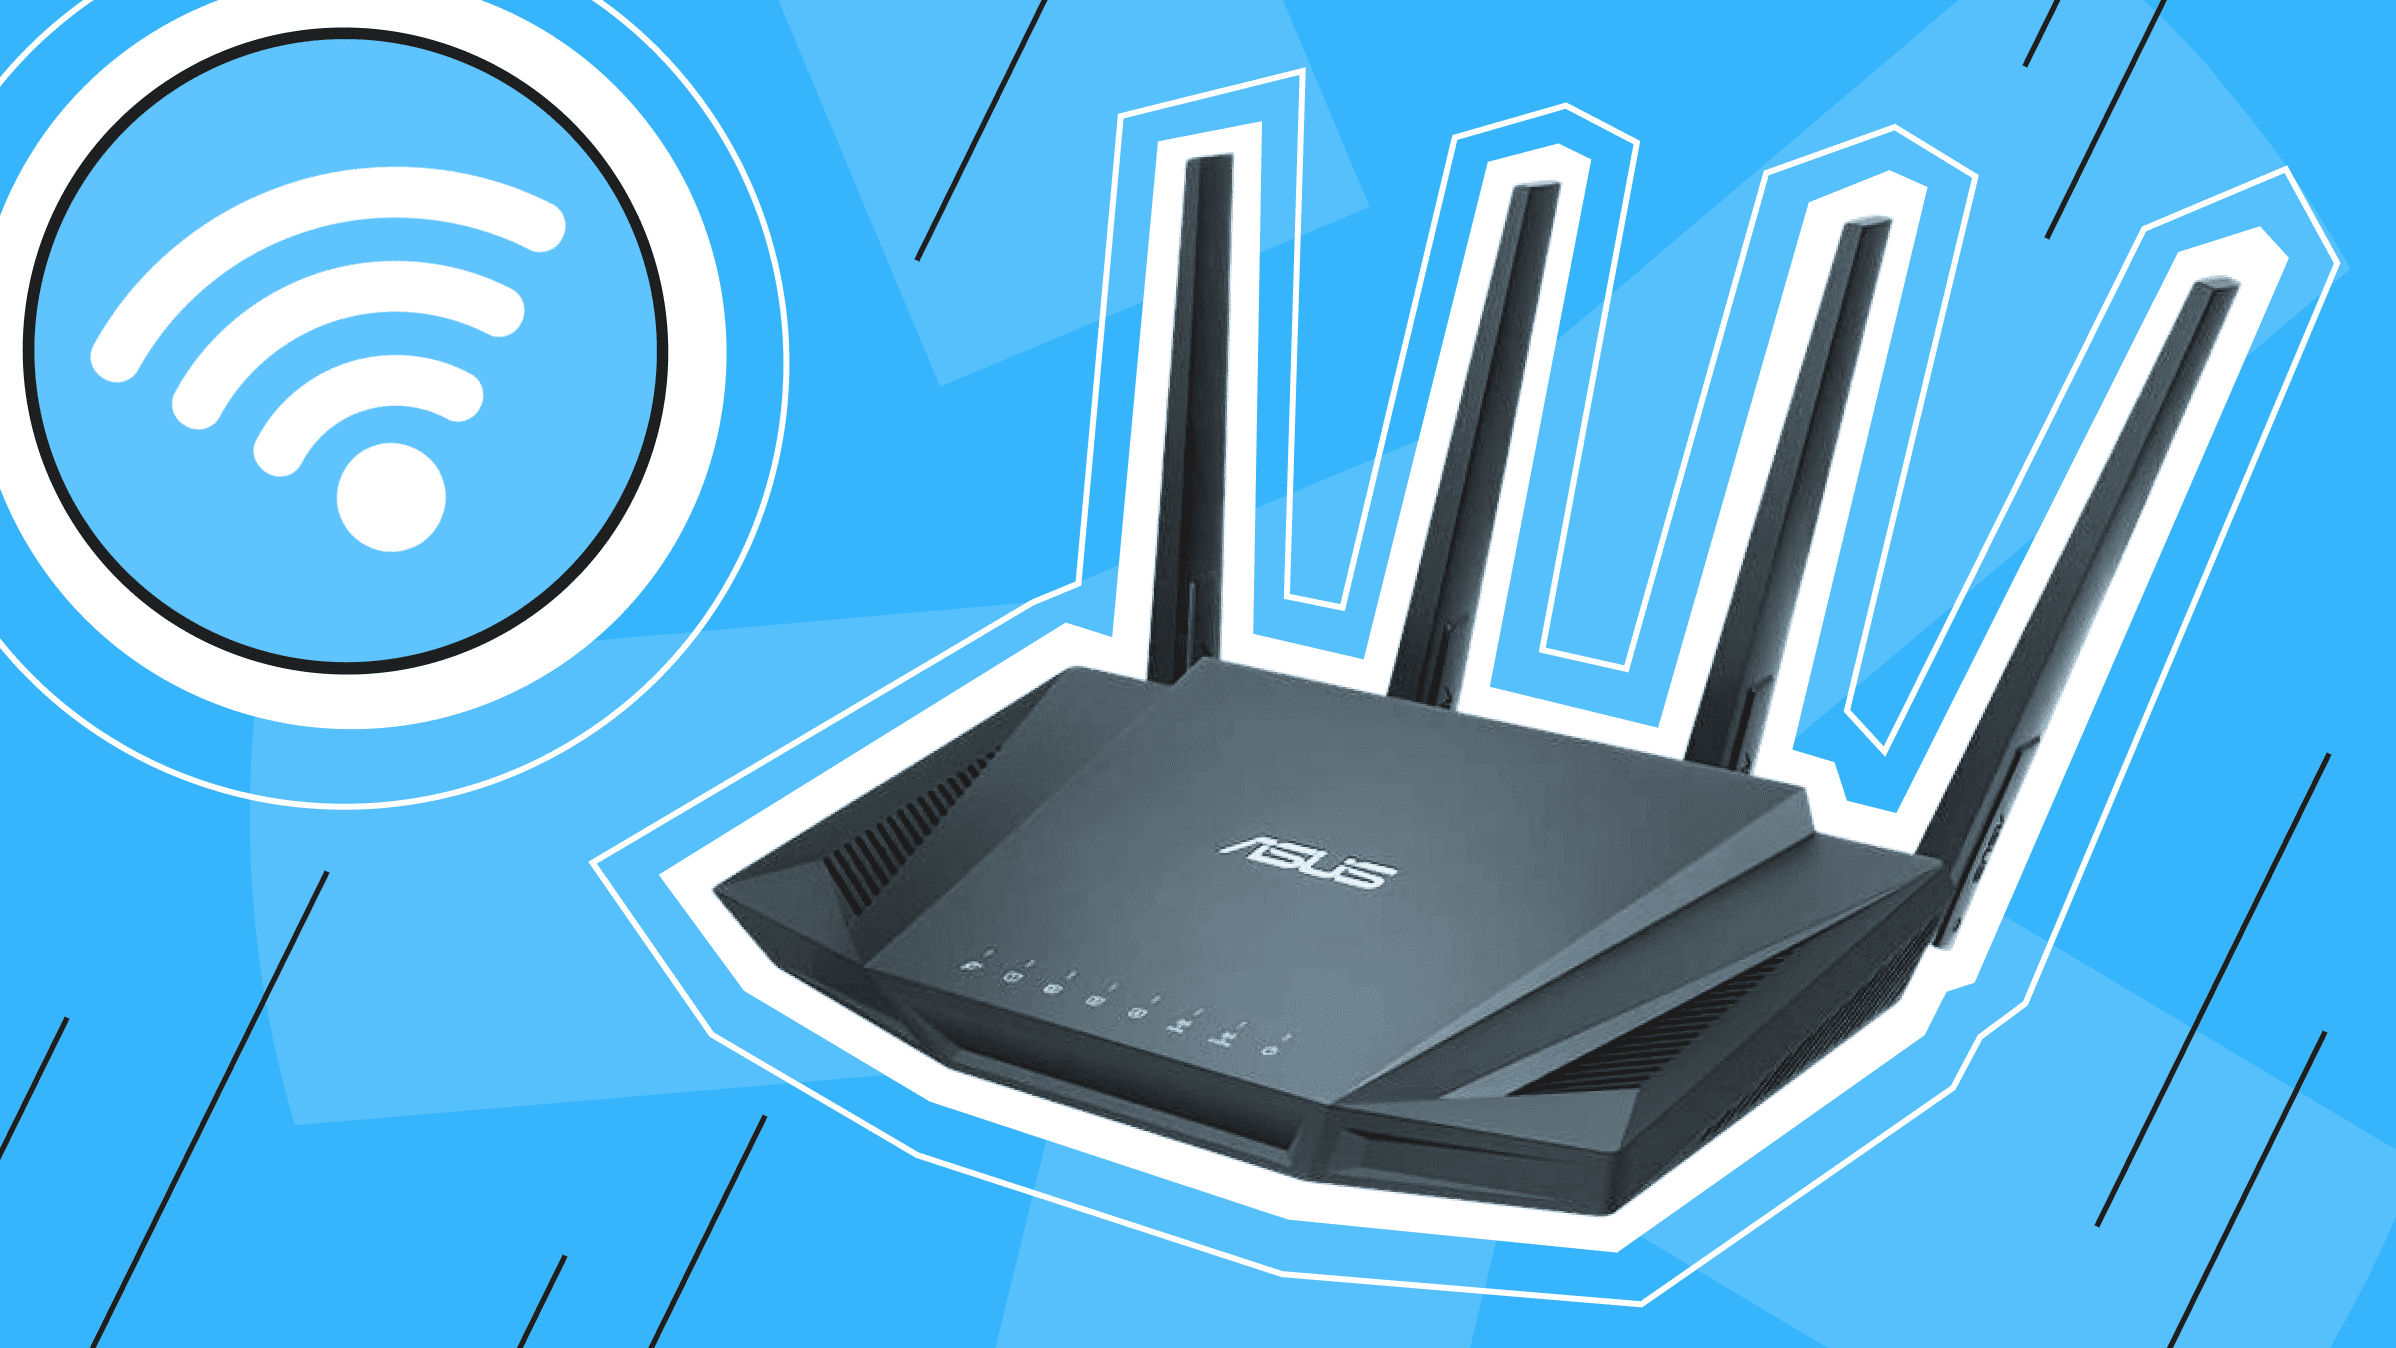 WEP, WPA, WPA2 and What Comes After: An Overview of Wireless Security Protocols